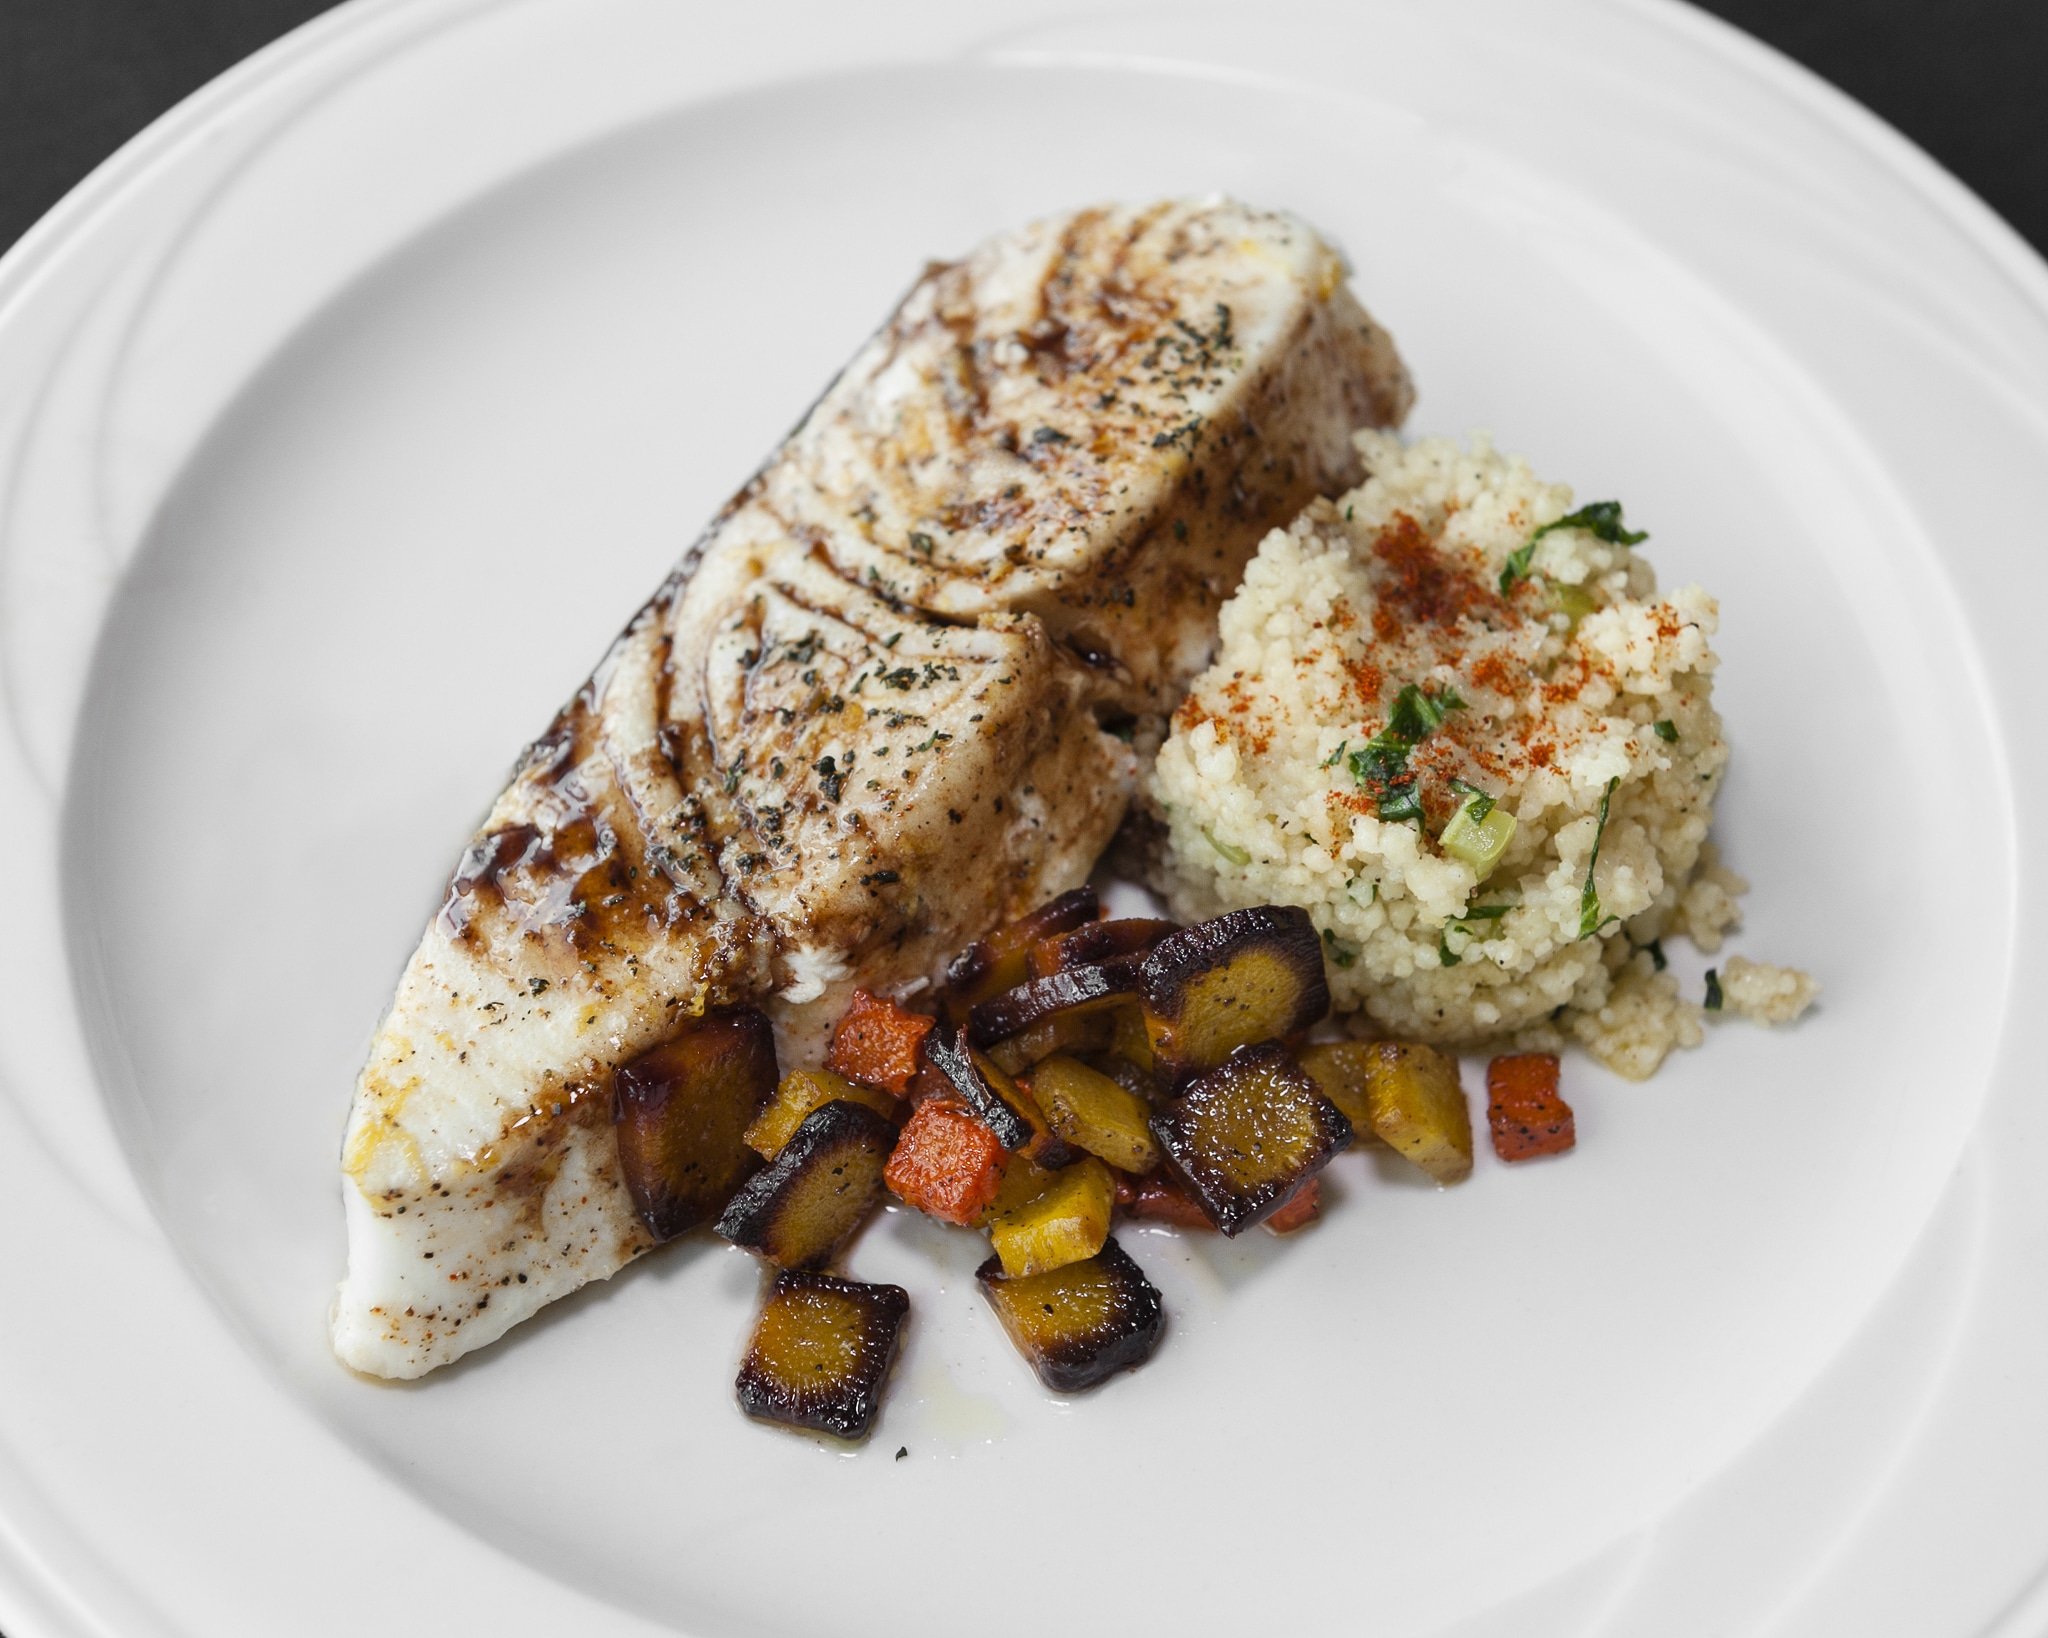 Plated halibut with vegetables and couscous.